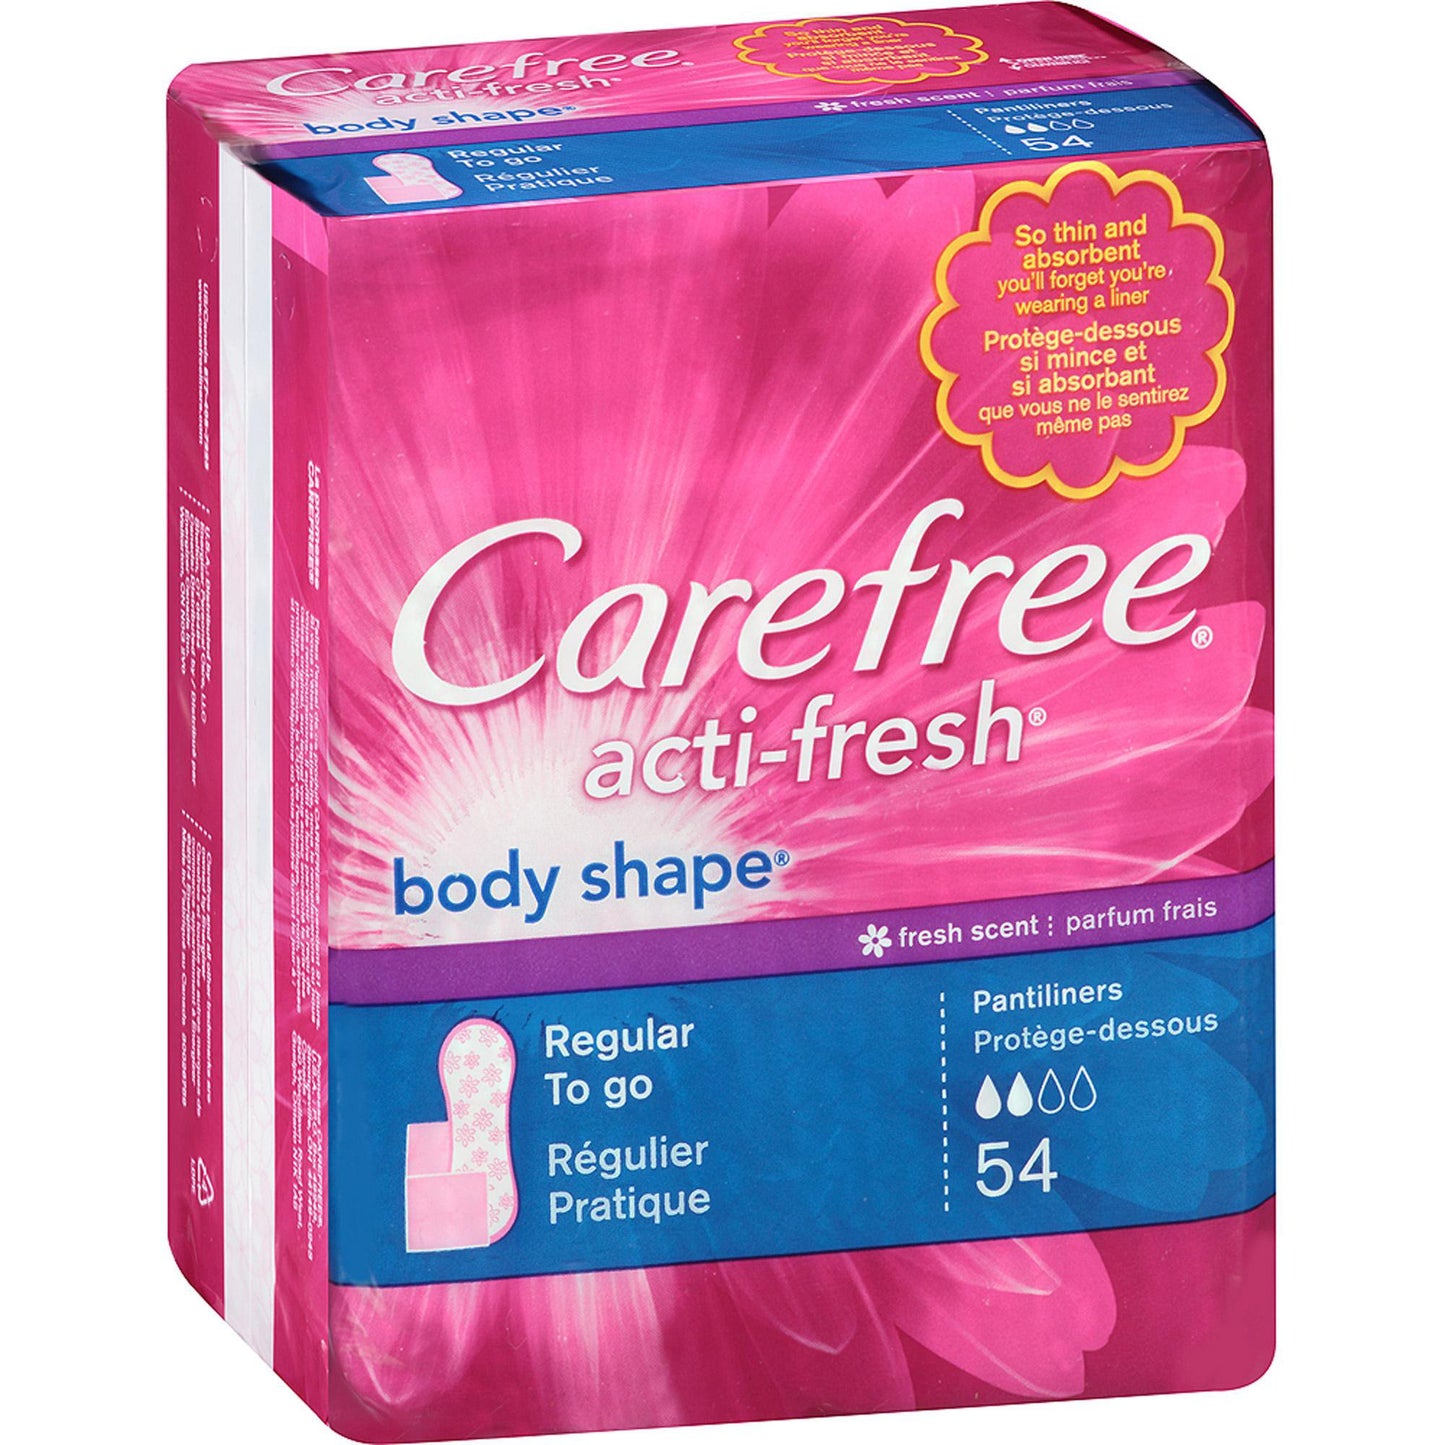 Pant Liner, Bdyshp Carefree Ind Wrp (54/Pk), Sold As 54/Pack Energizer 07830006994